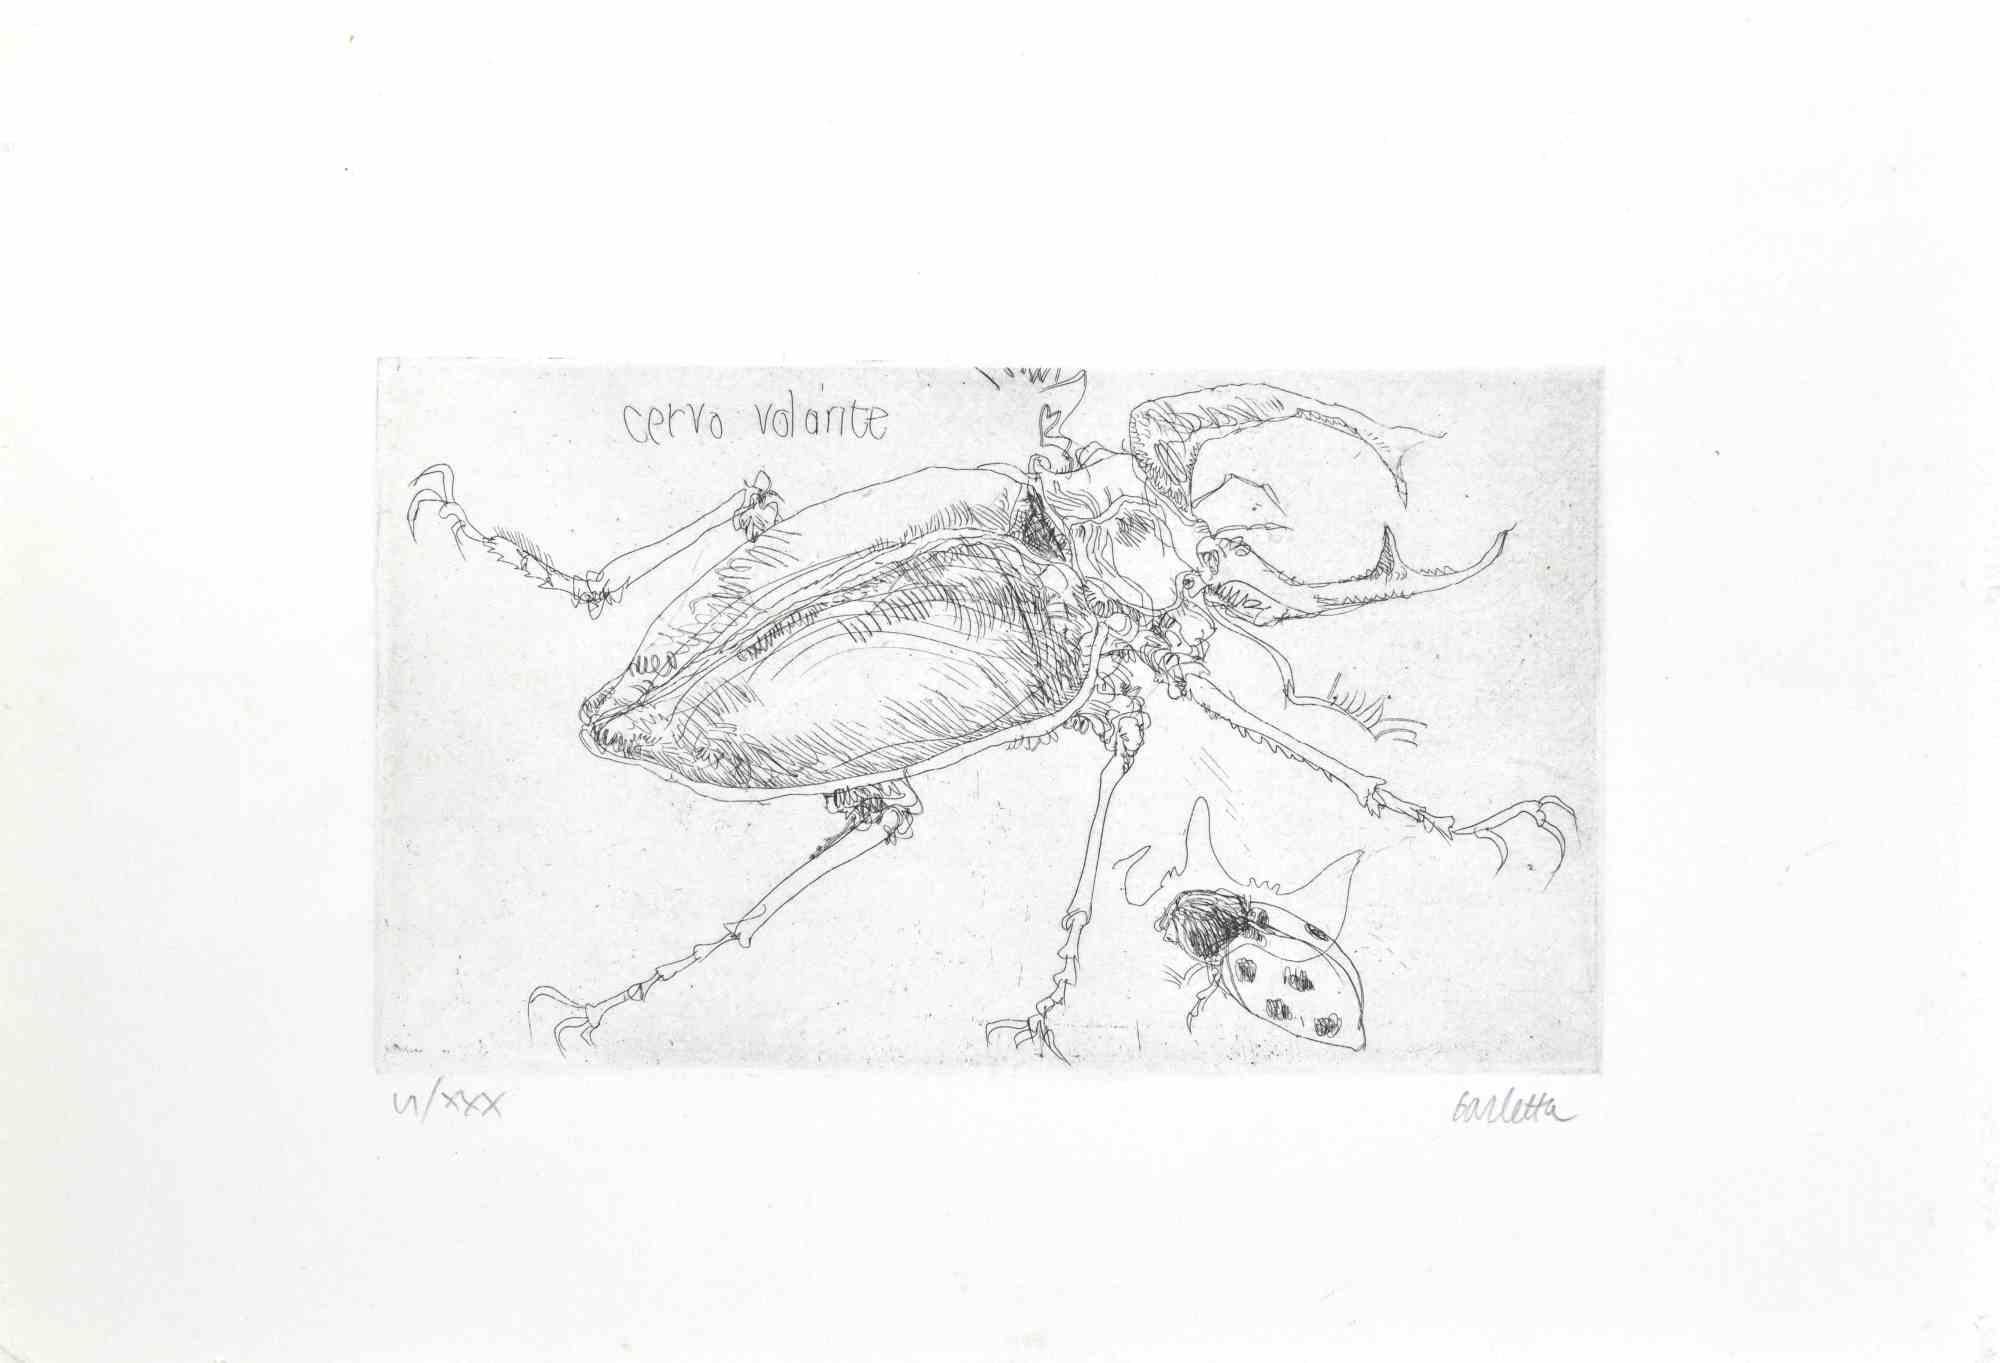 Insects  is an etching realized by  Sergio Barletta in 1974.

Hand-signed in pencil on the lower right. Numbered on the lower left in Roman numerals, from the edition of XXX prints.

Titled in Italian at the top left  "Cervo Volante".

In very good